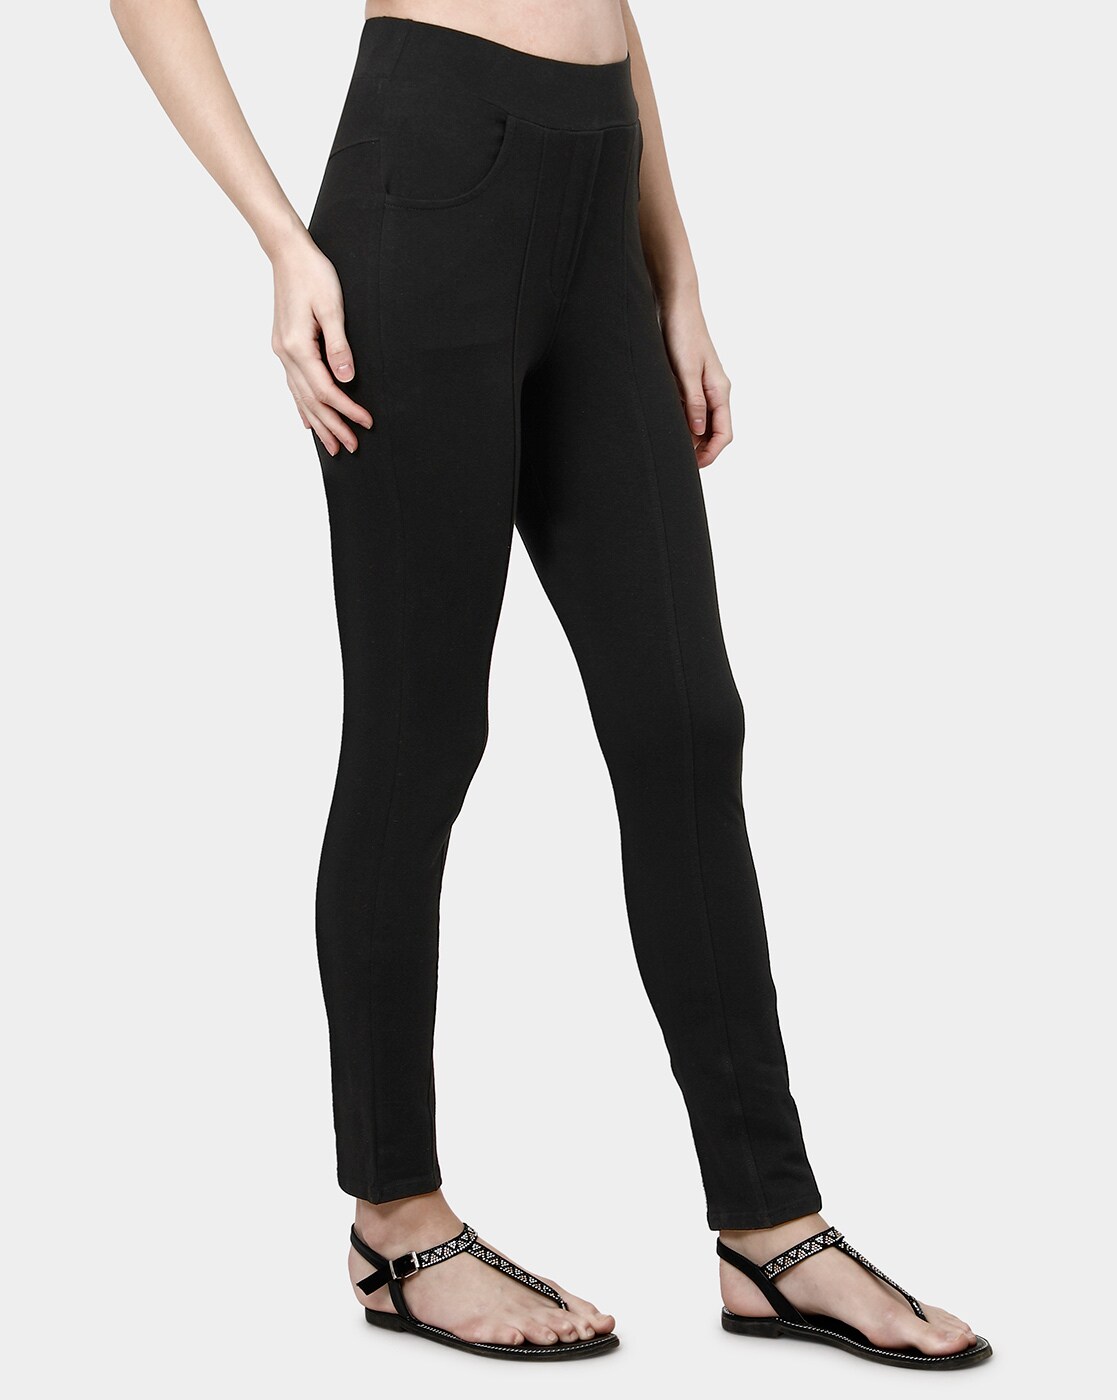 Buy Black Jeans & Jeggings for Women by NGT Online